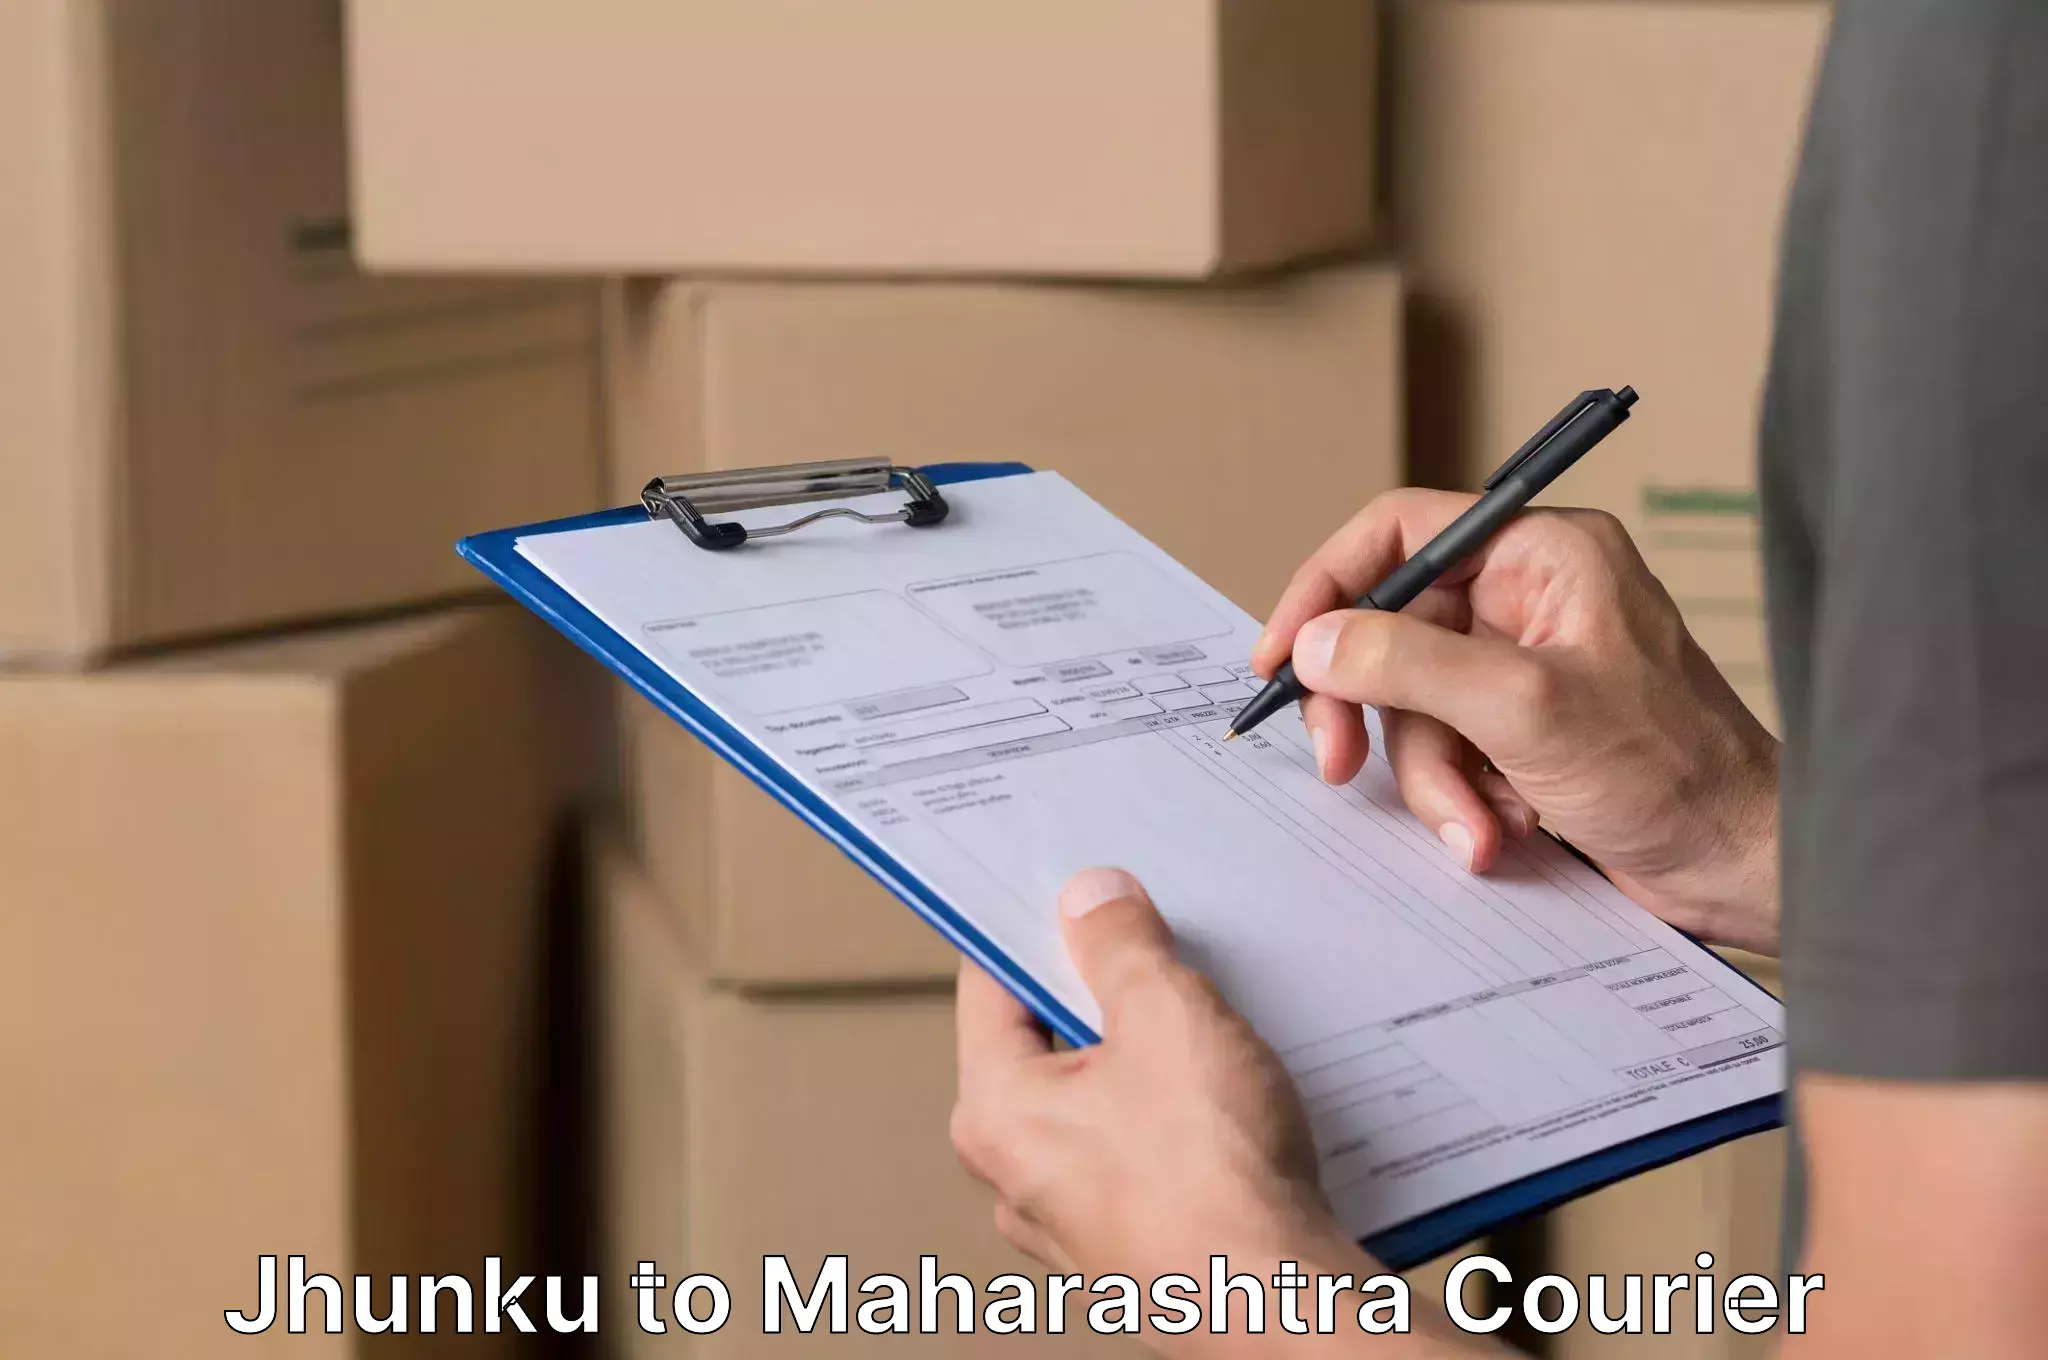 Home moving specialists Jhunku to Wardha